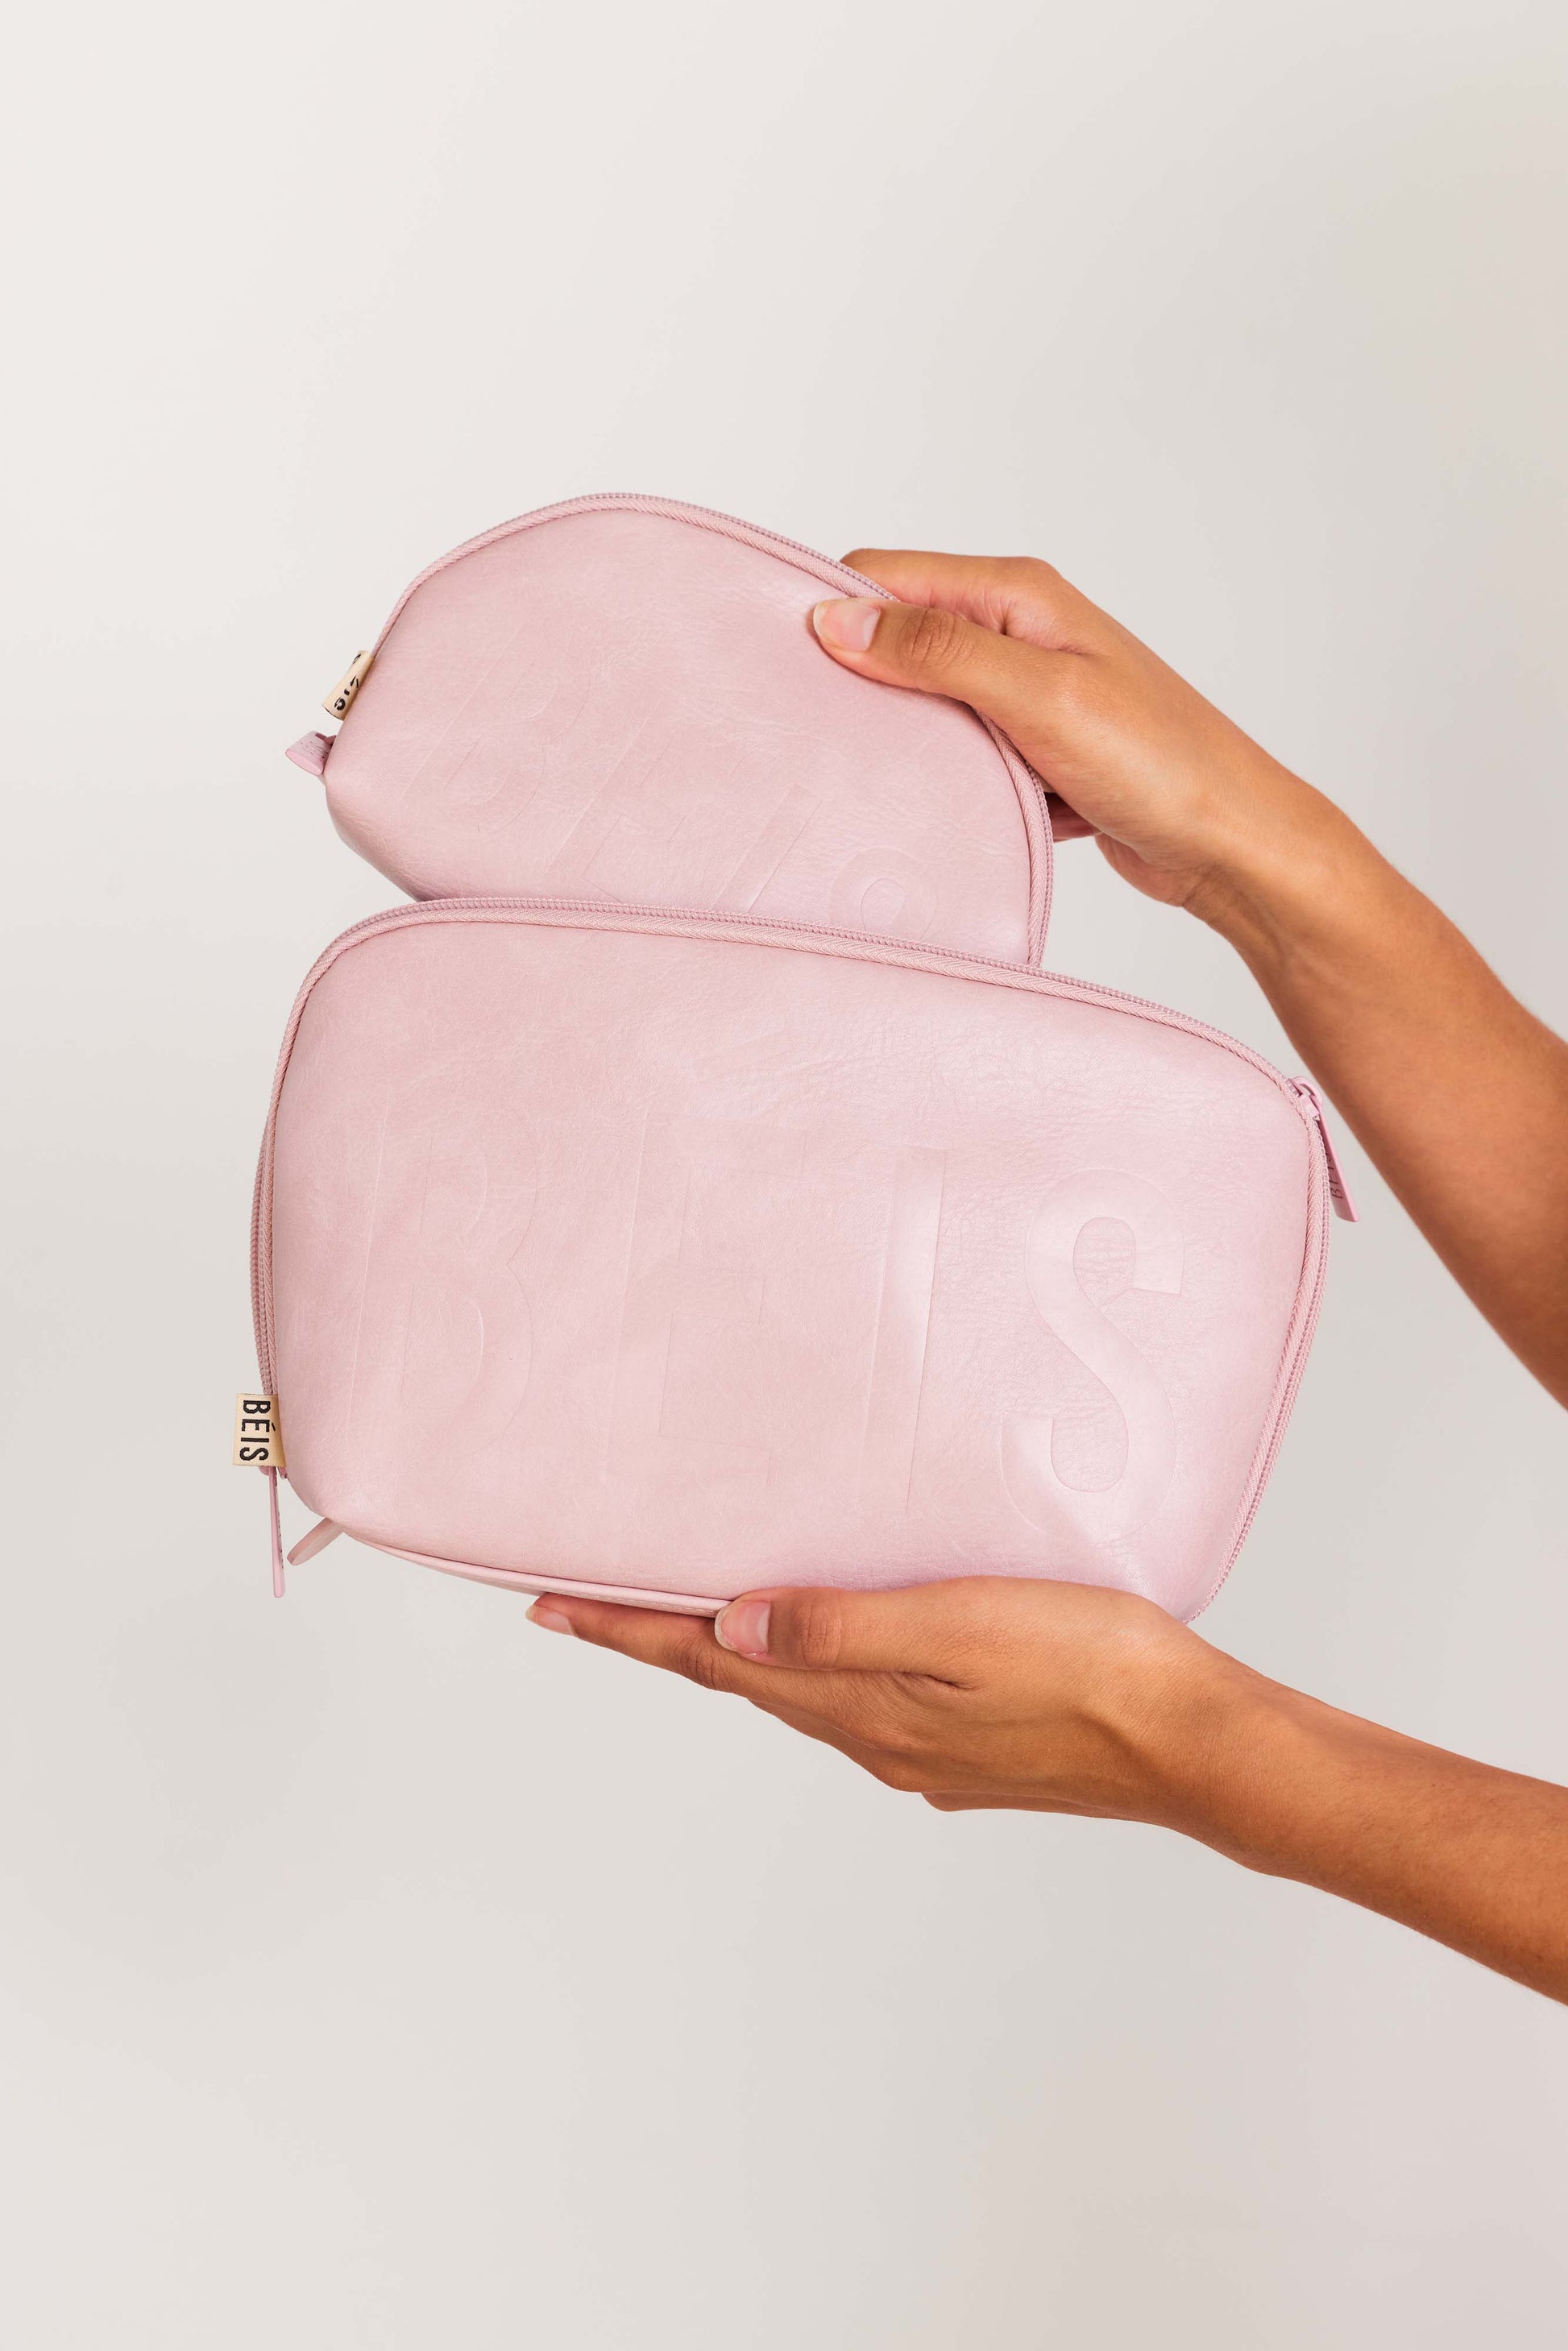 BÉis The Cosmetic Pouch Set In Pink